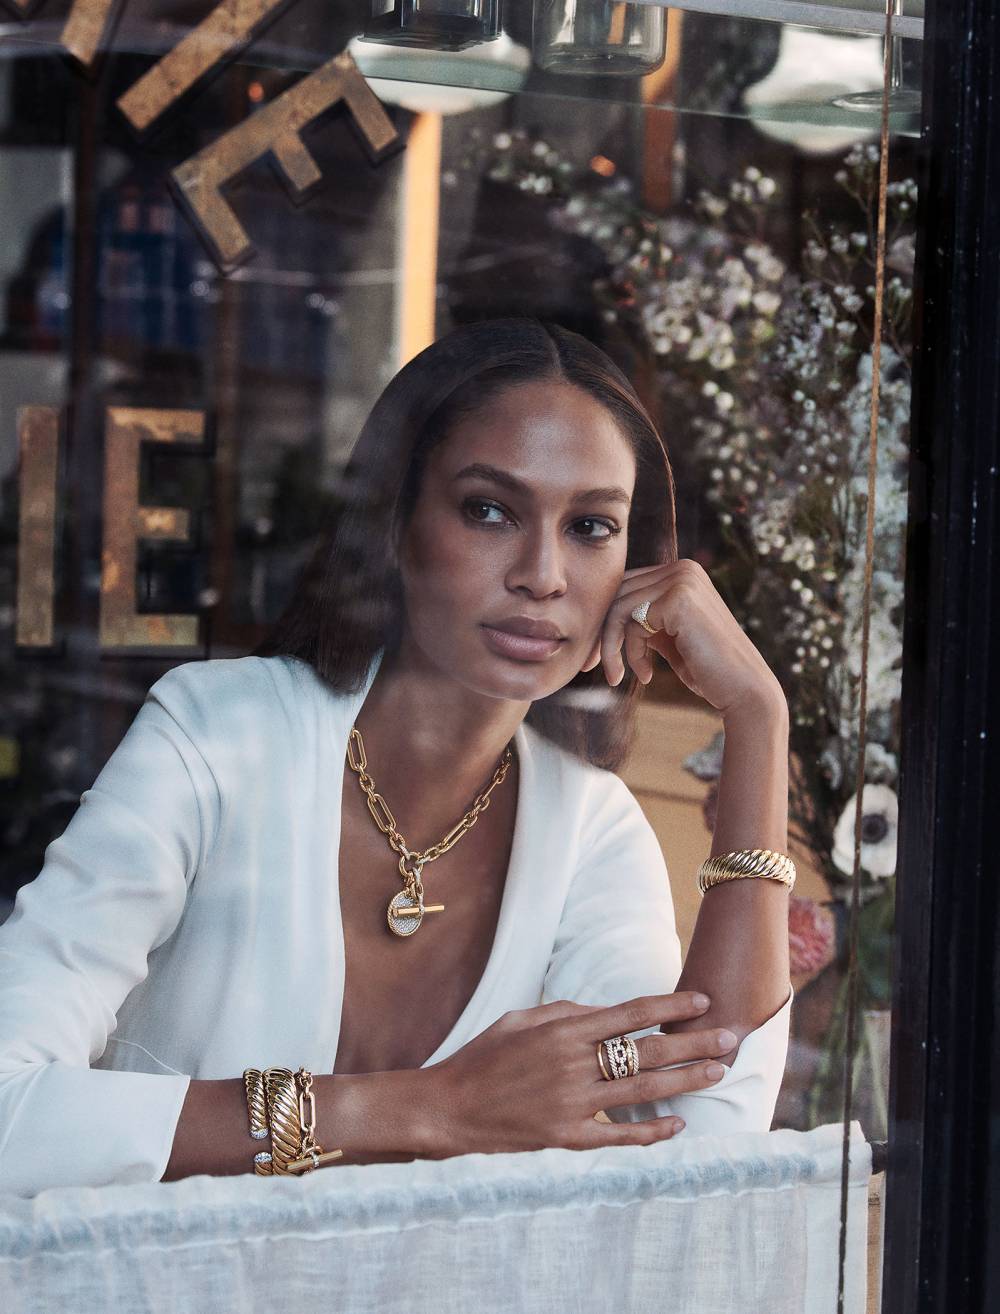 Joan Smalls Shares Her No. 1 Jewelry Tip: ‘Go With Classics’